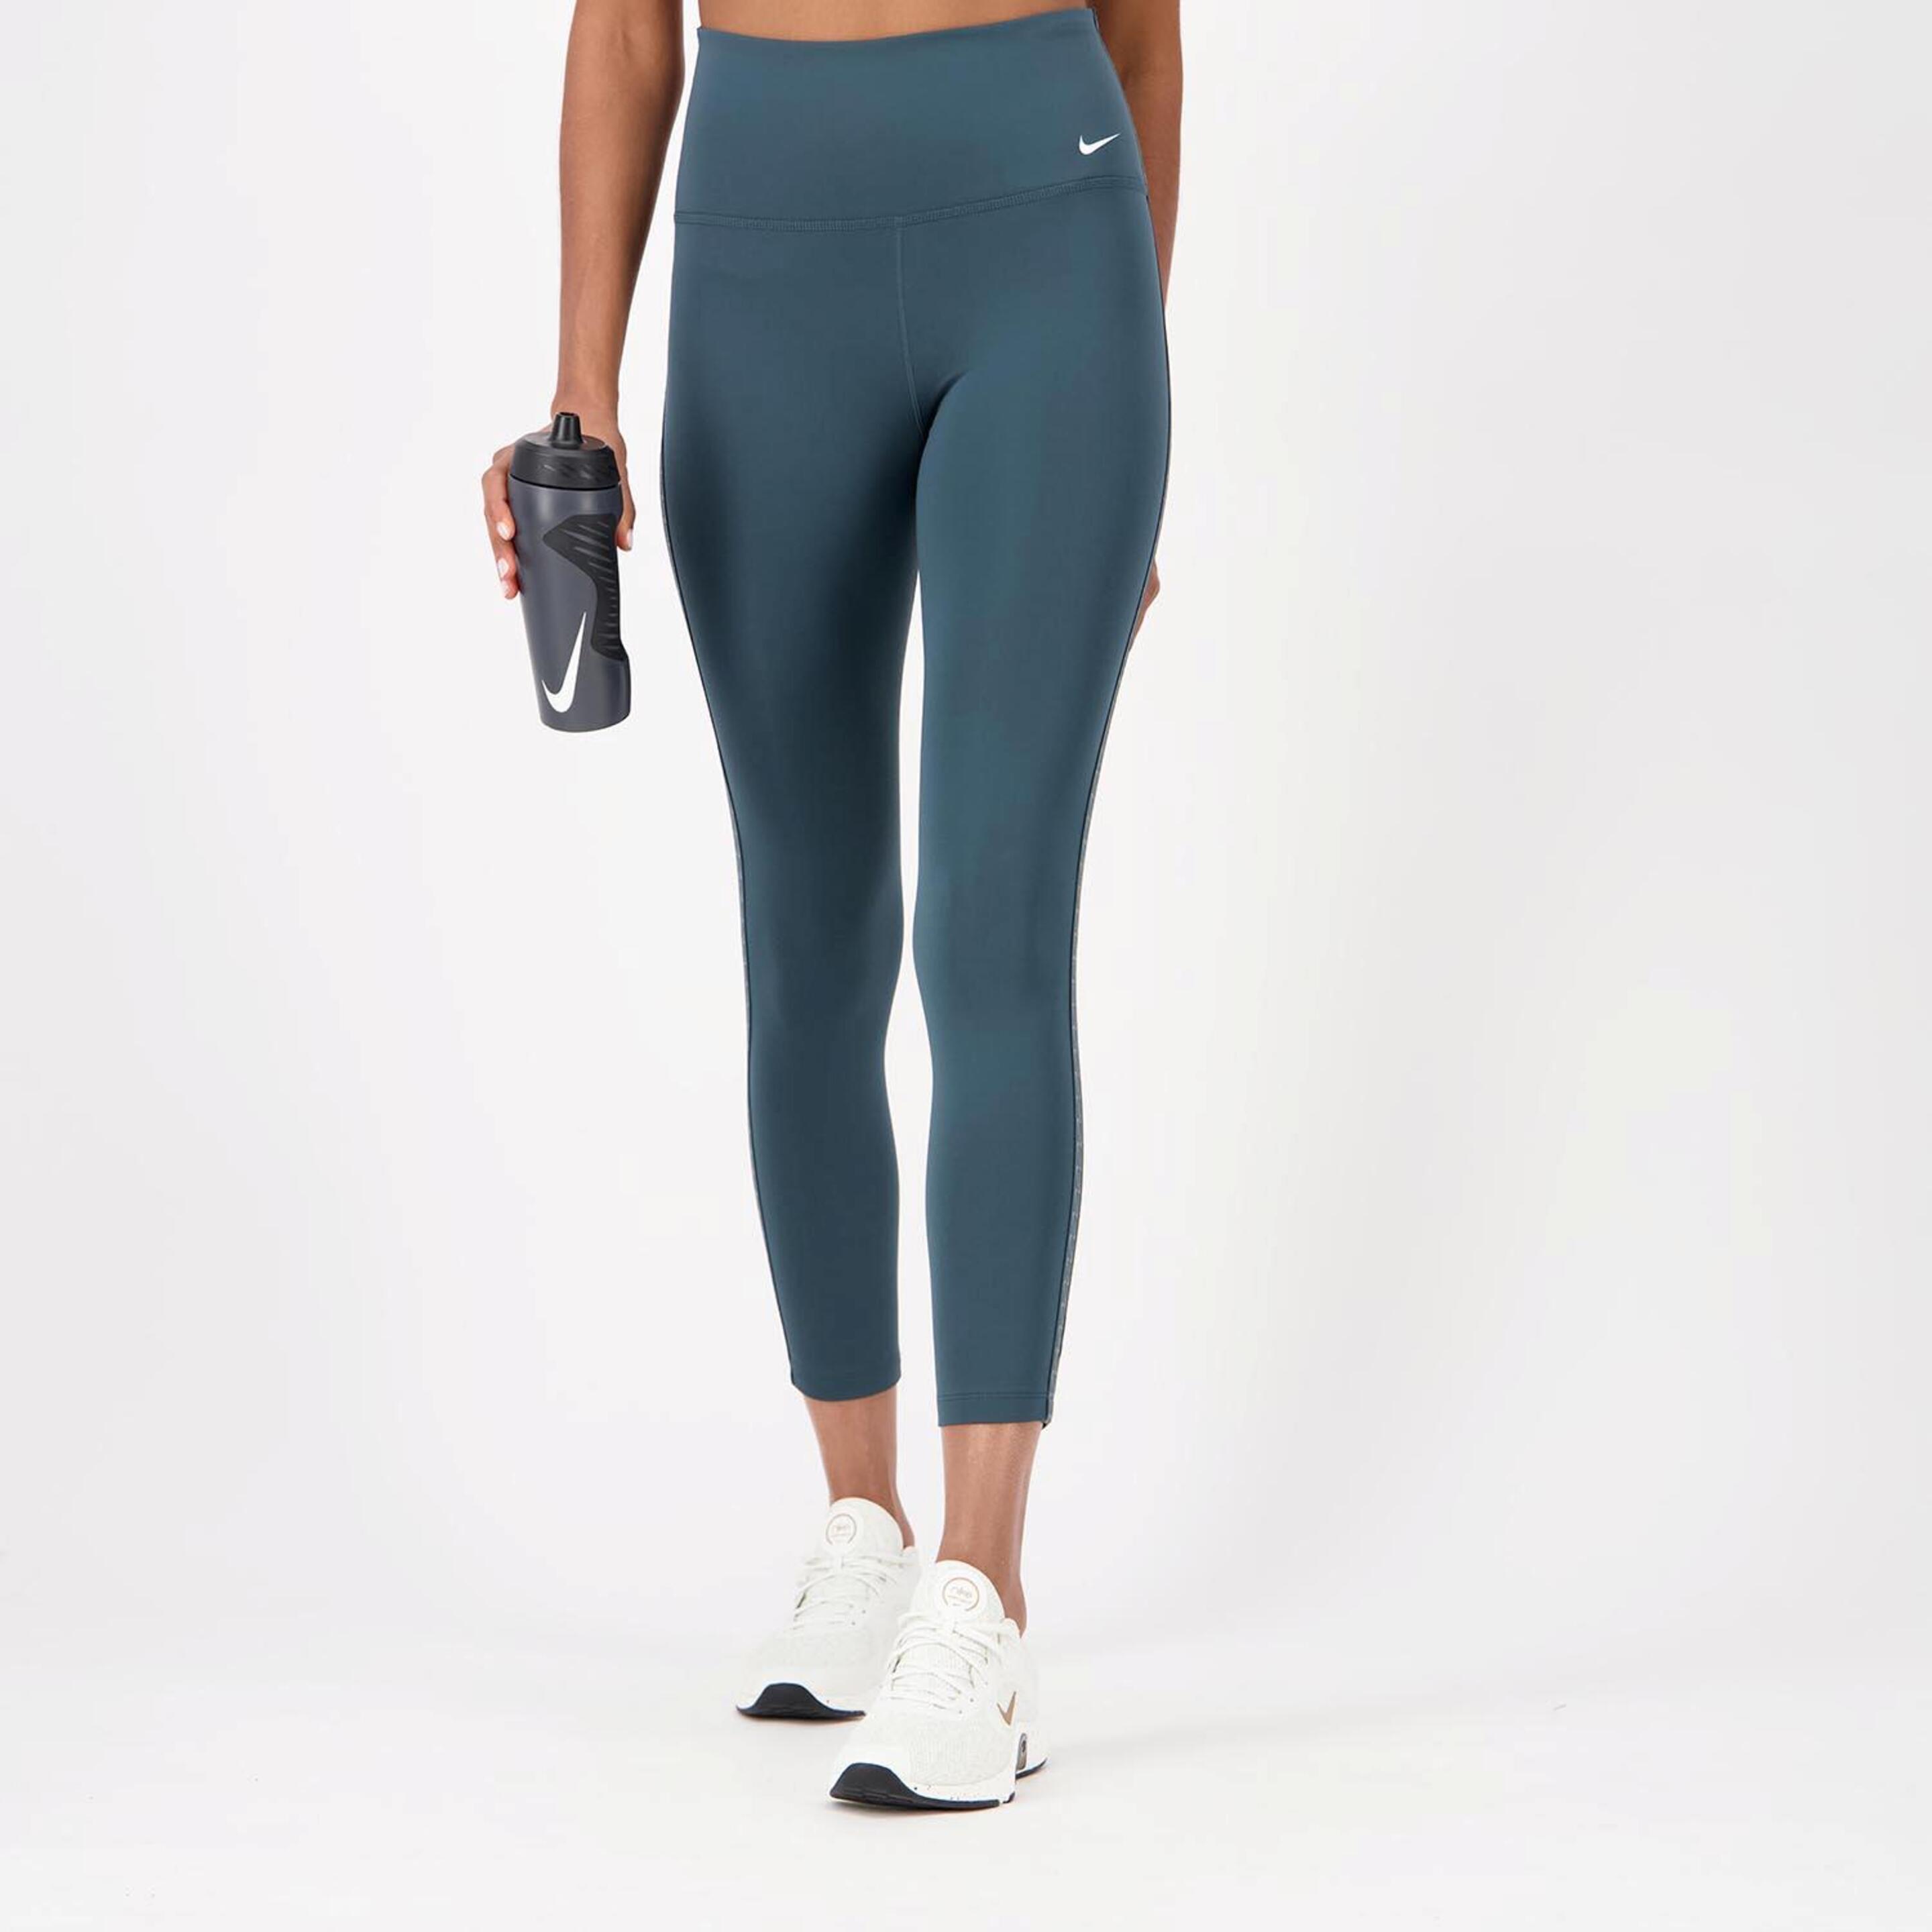 Nike One - gris - Mallas Mujer